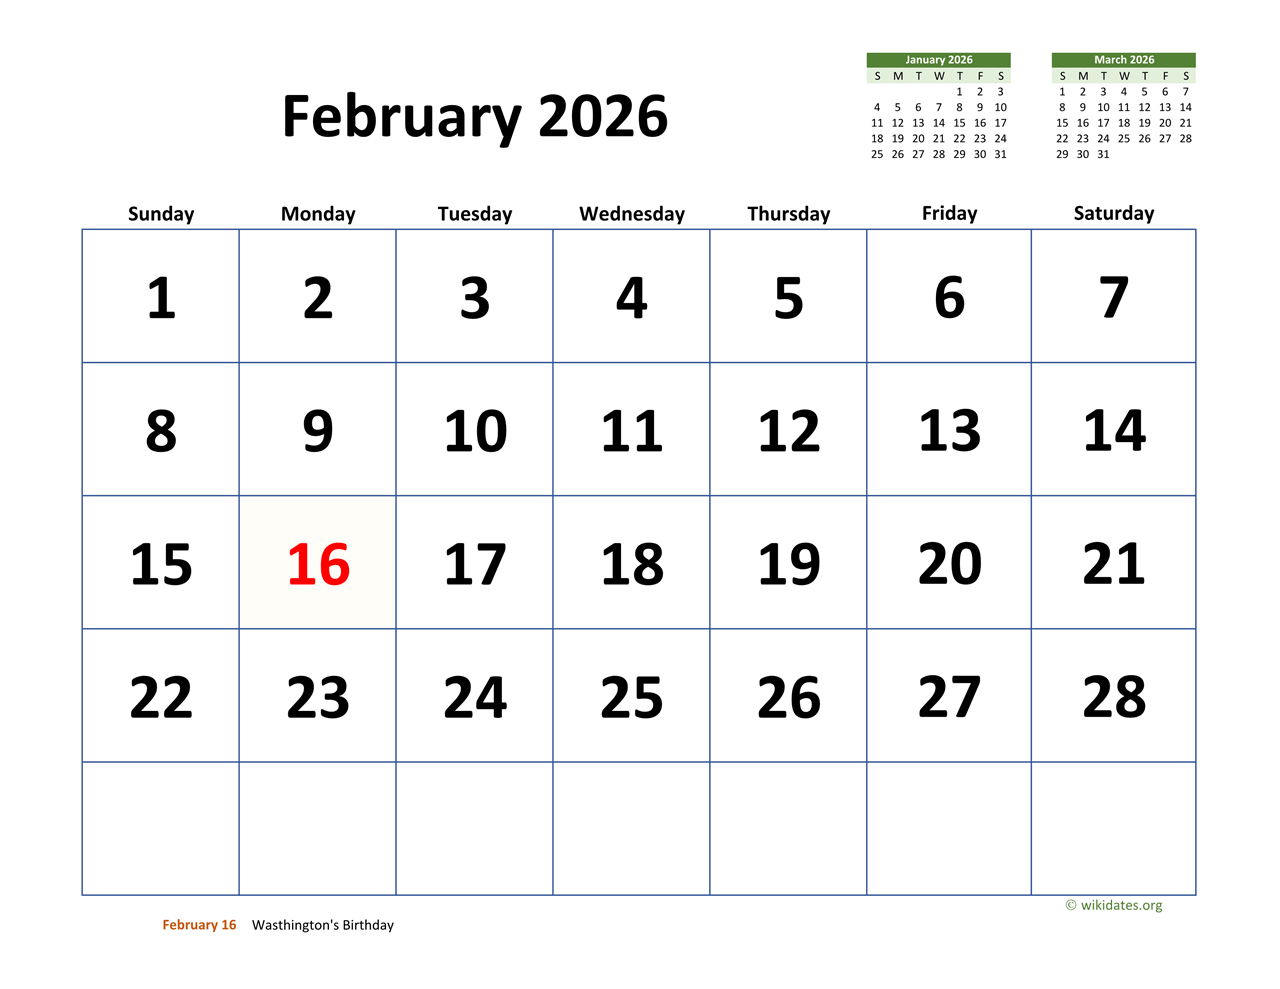 February 2026 Calendar with Extra-large Dates | WikiDates.org